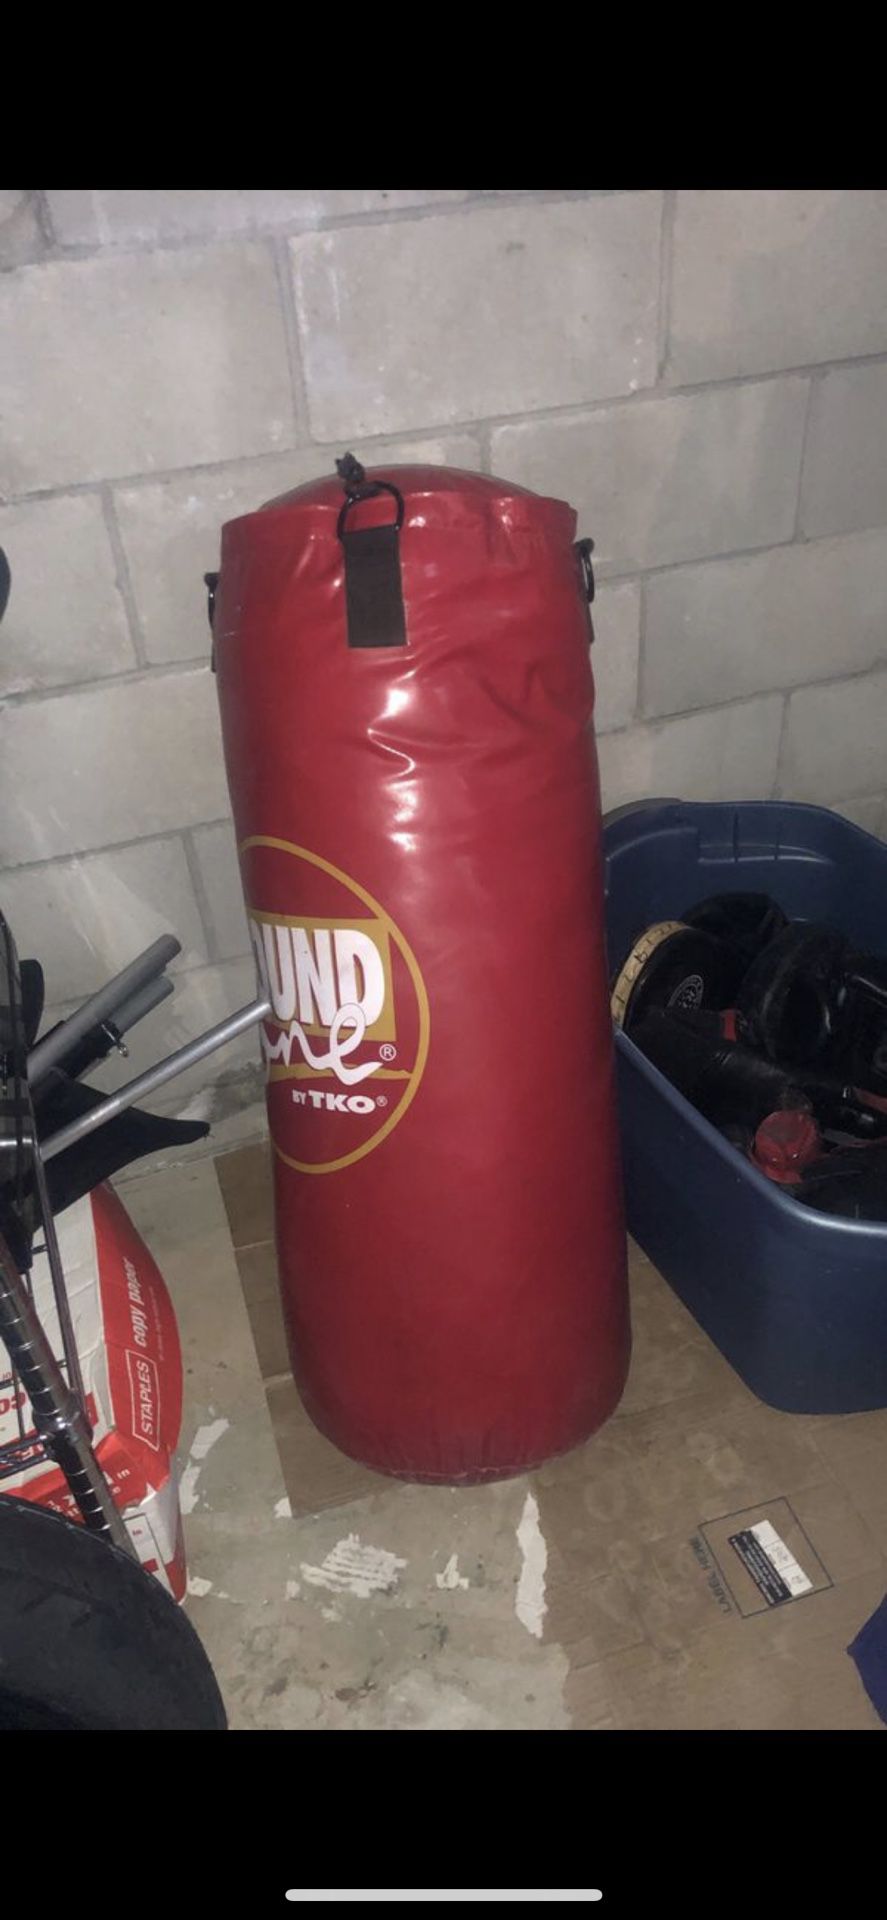 Punching bag and gloves.